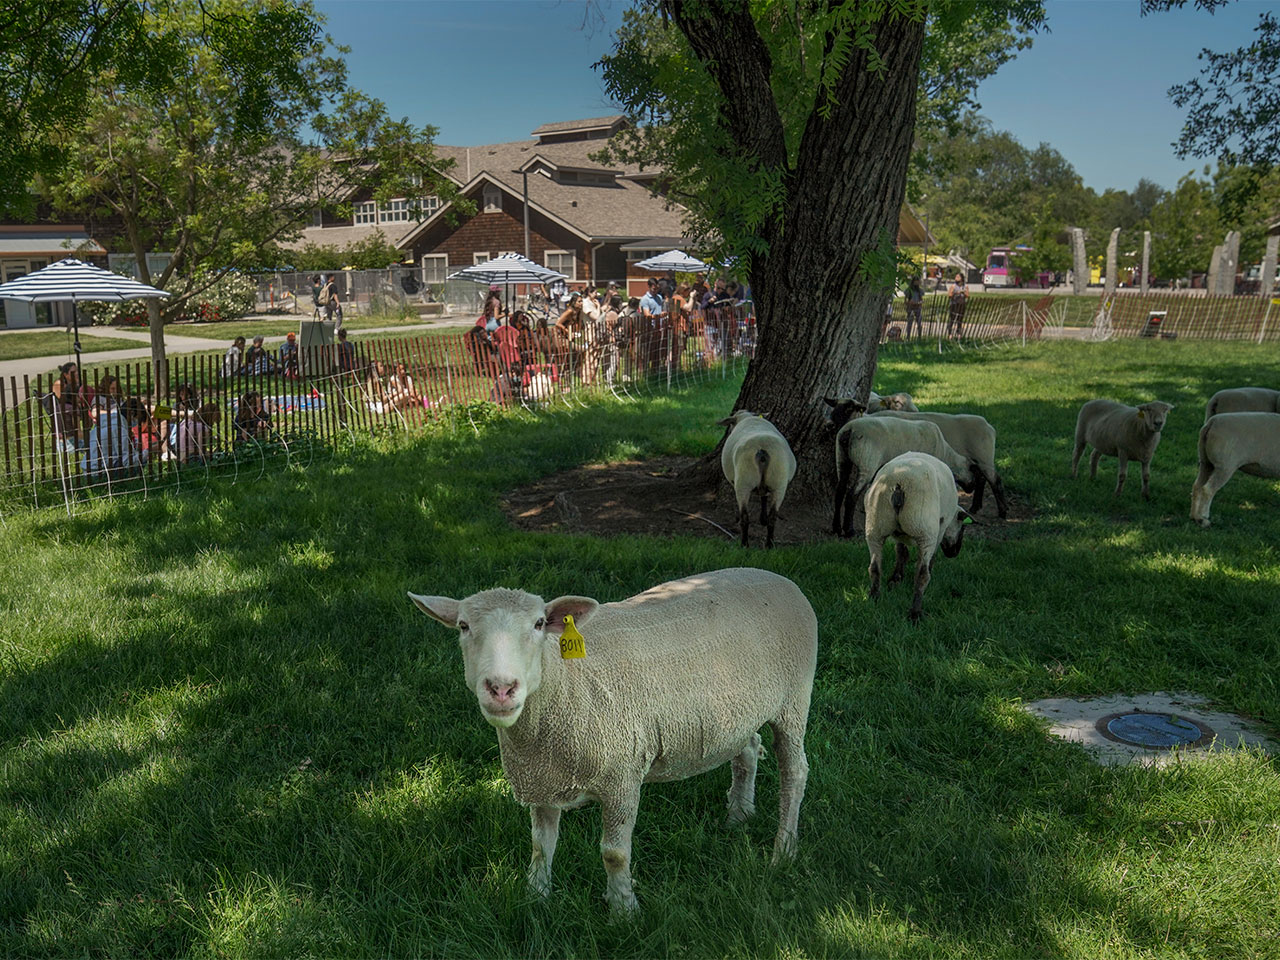 Sheep calmly grazing on a grassy field at UC Davis, with one sheep looking toward the camera and students painting in the background, shaded by a large tree.